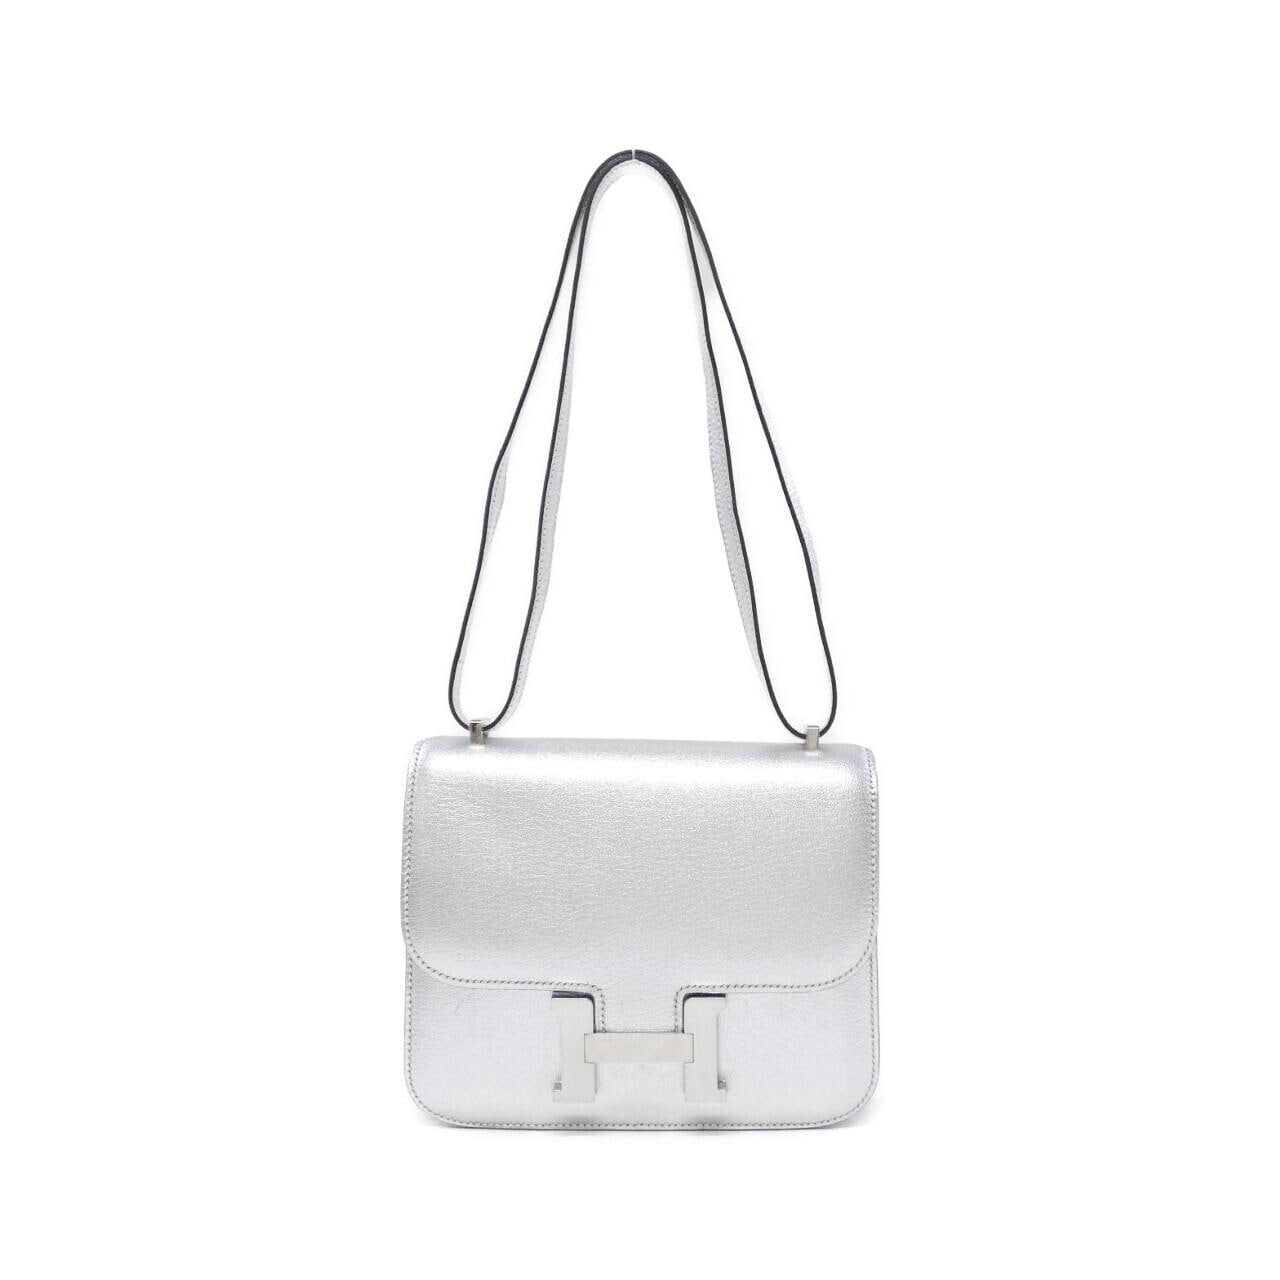 3D model Hermes Constance Bag White Leather VR / AR / low-poly | CGTrader